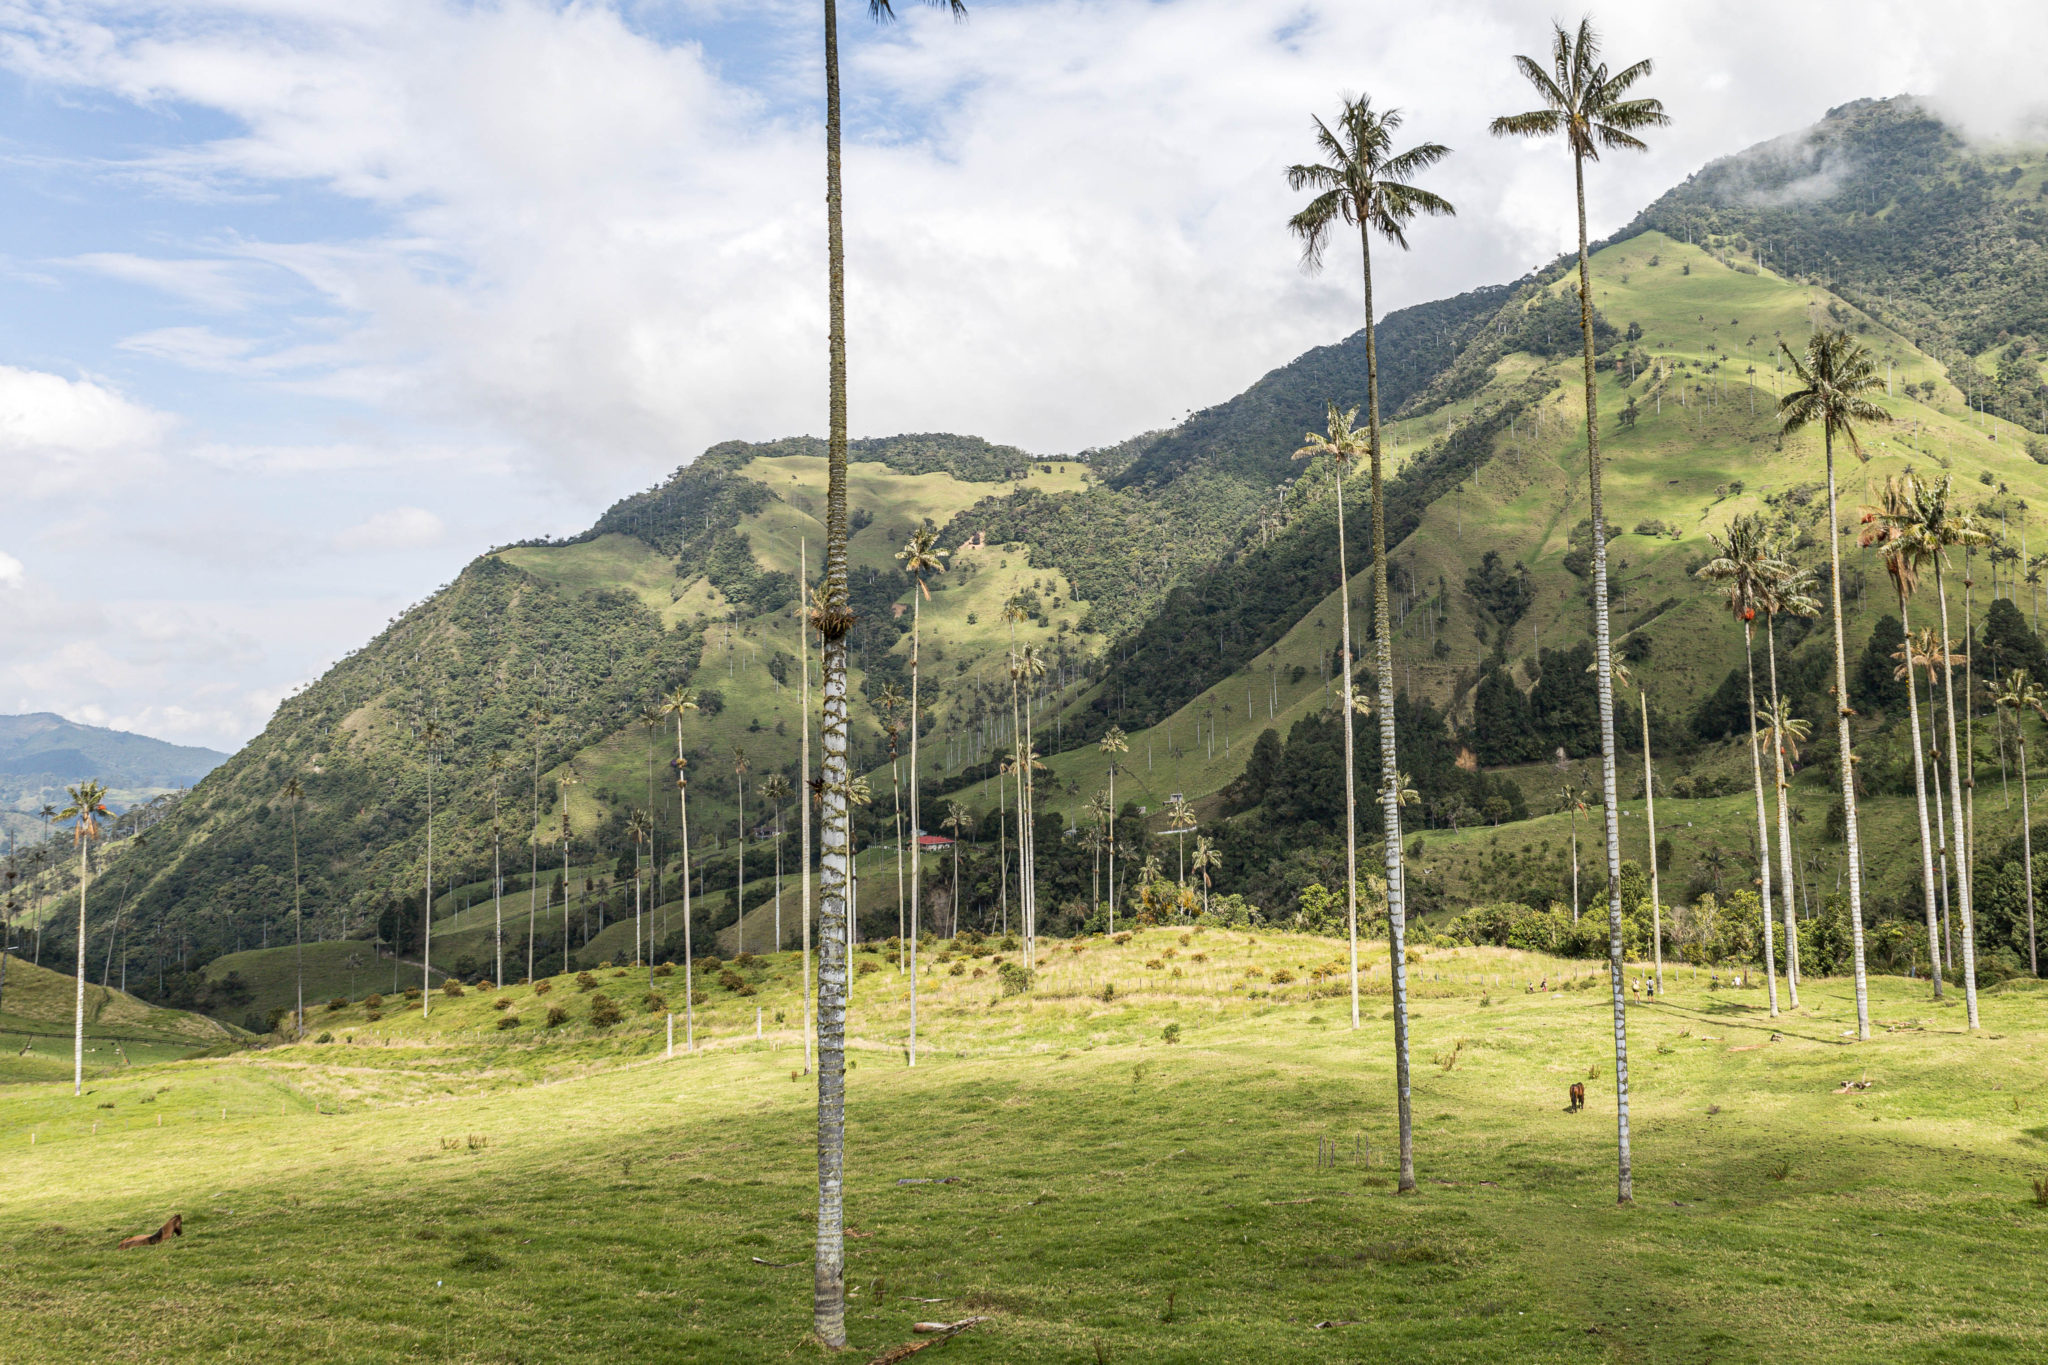 Palm trees with Andes mountains behind. Spend two weeks in one of South America's most interesting countries, Colombia and explore the jungles and seas it has to offer